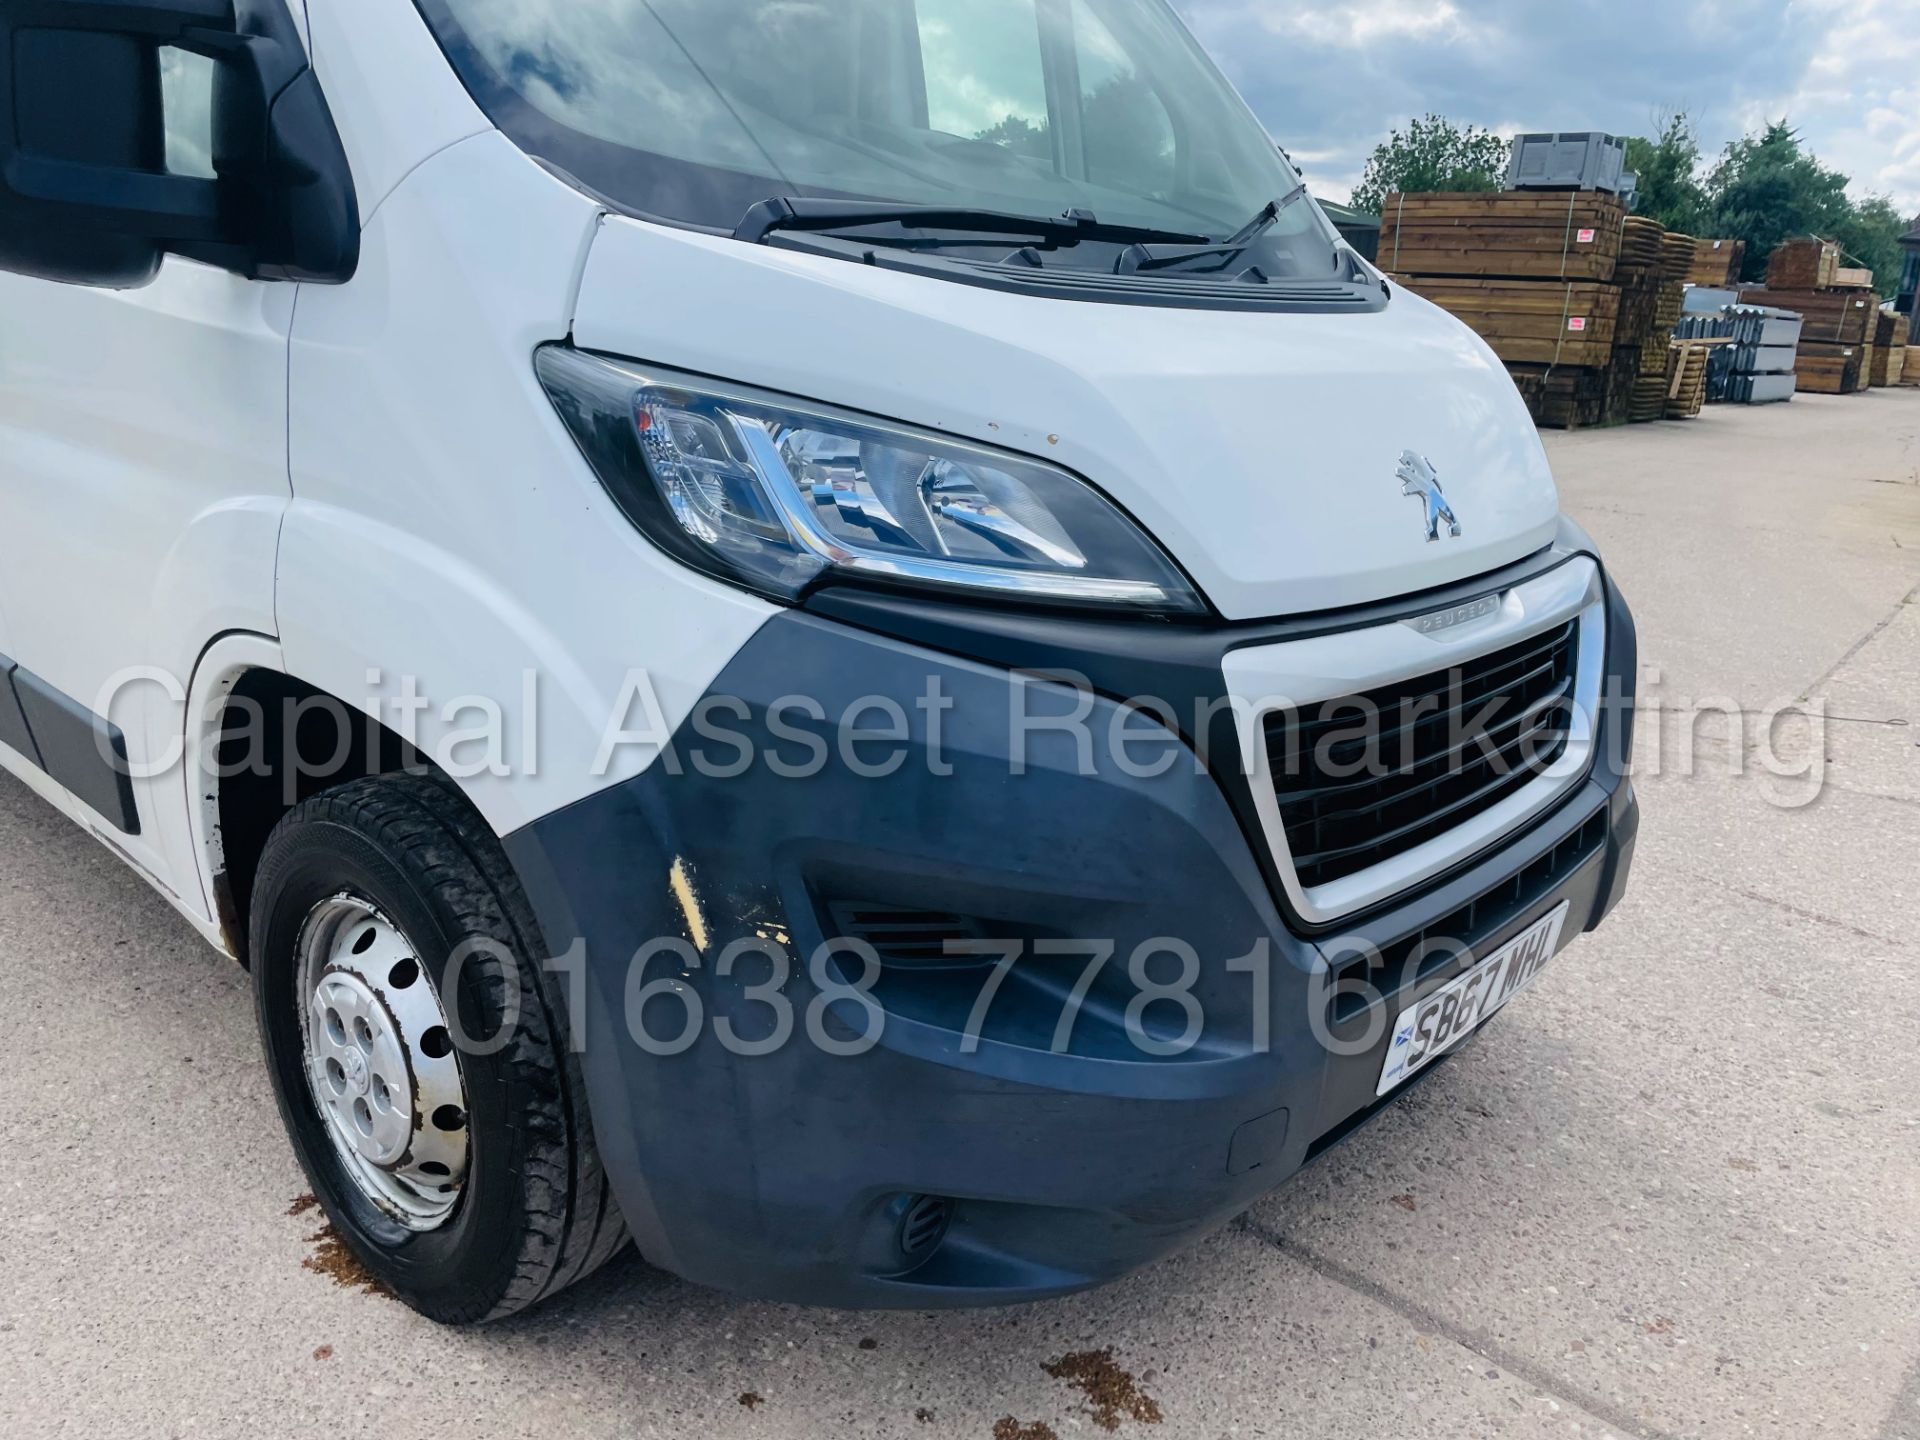 ON SALE PEUGEOT BOXER *PROFESSIONAL* LWB HI-ROOF (2018 - EURO 6) '2.0 BLUE HDI - 6 SPEED' *A/C & NAV - Image 15 of 44